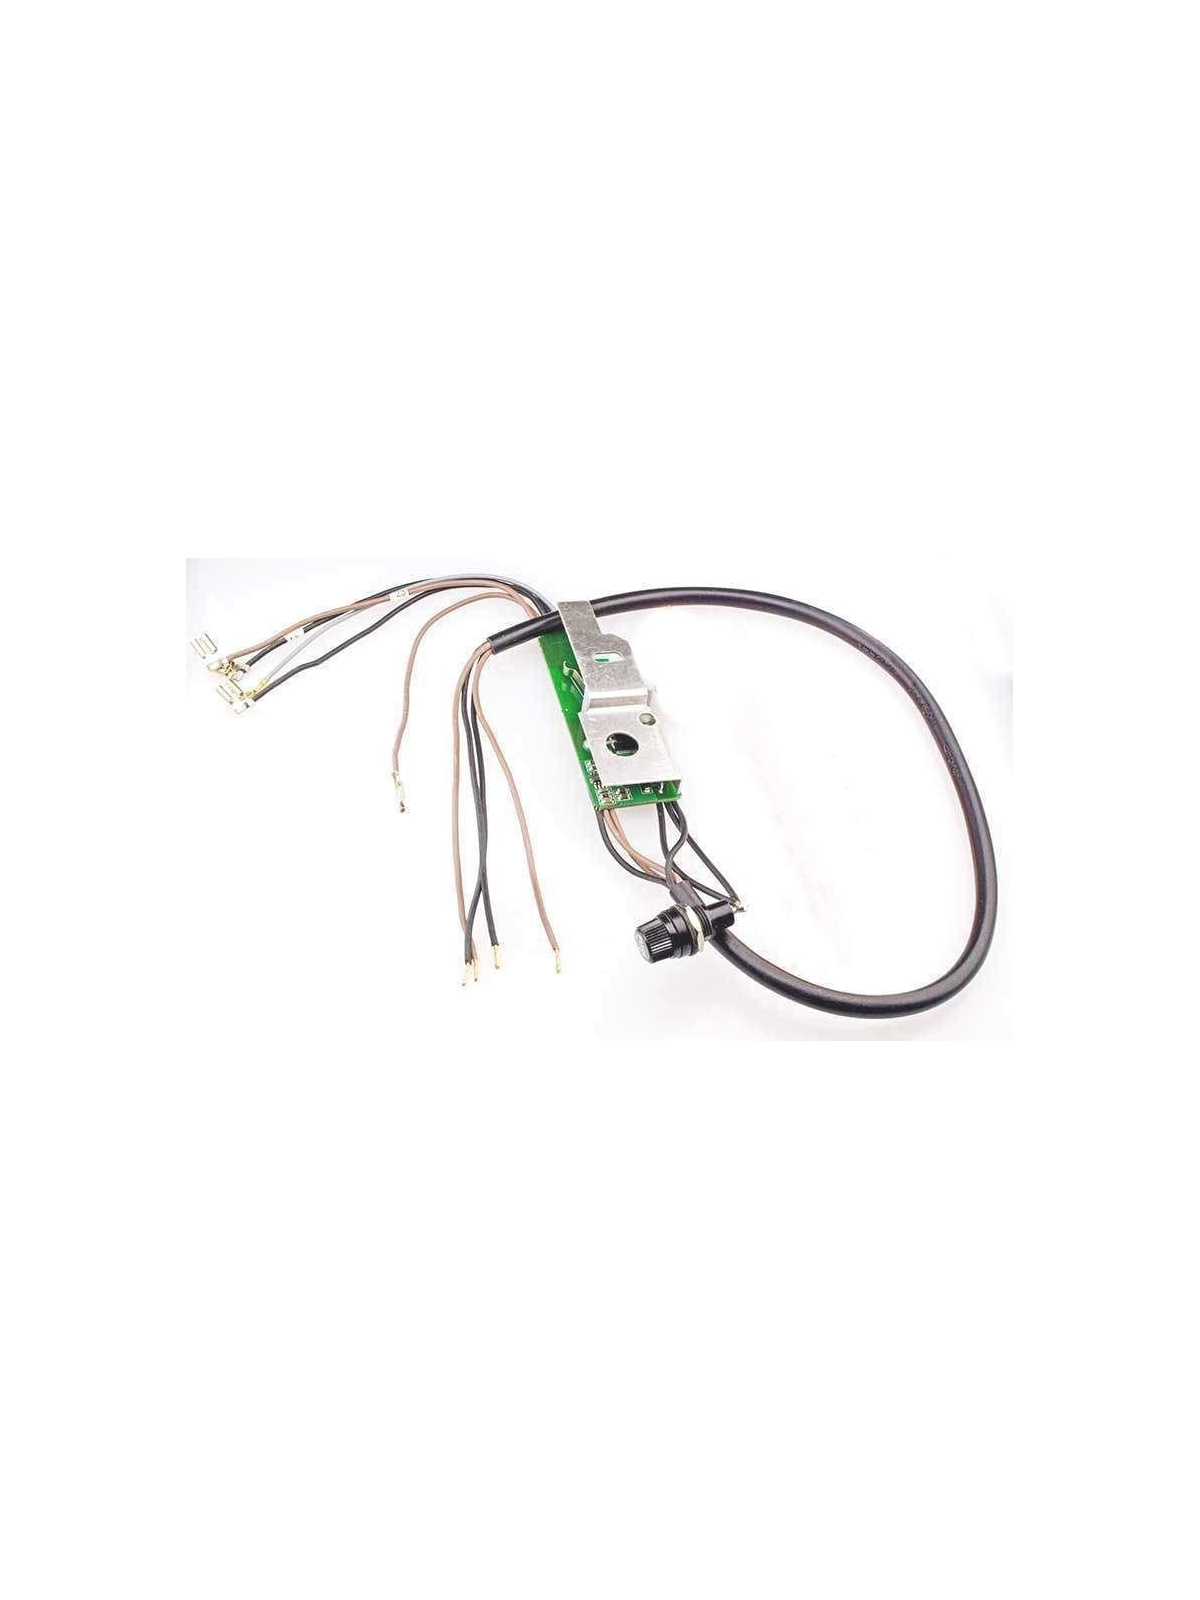 Virutex 3346589 ELECTRONIC CIRCUIT+WIRES ASS'Y | JVL-Europe